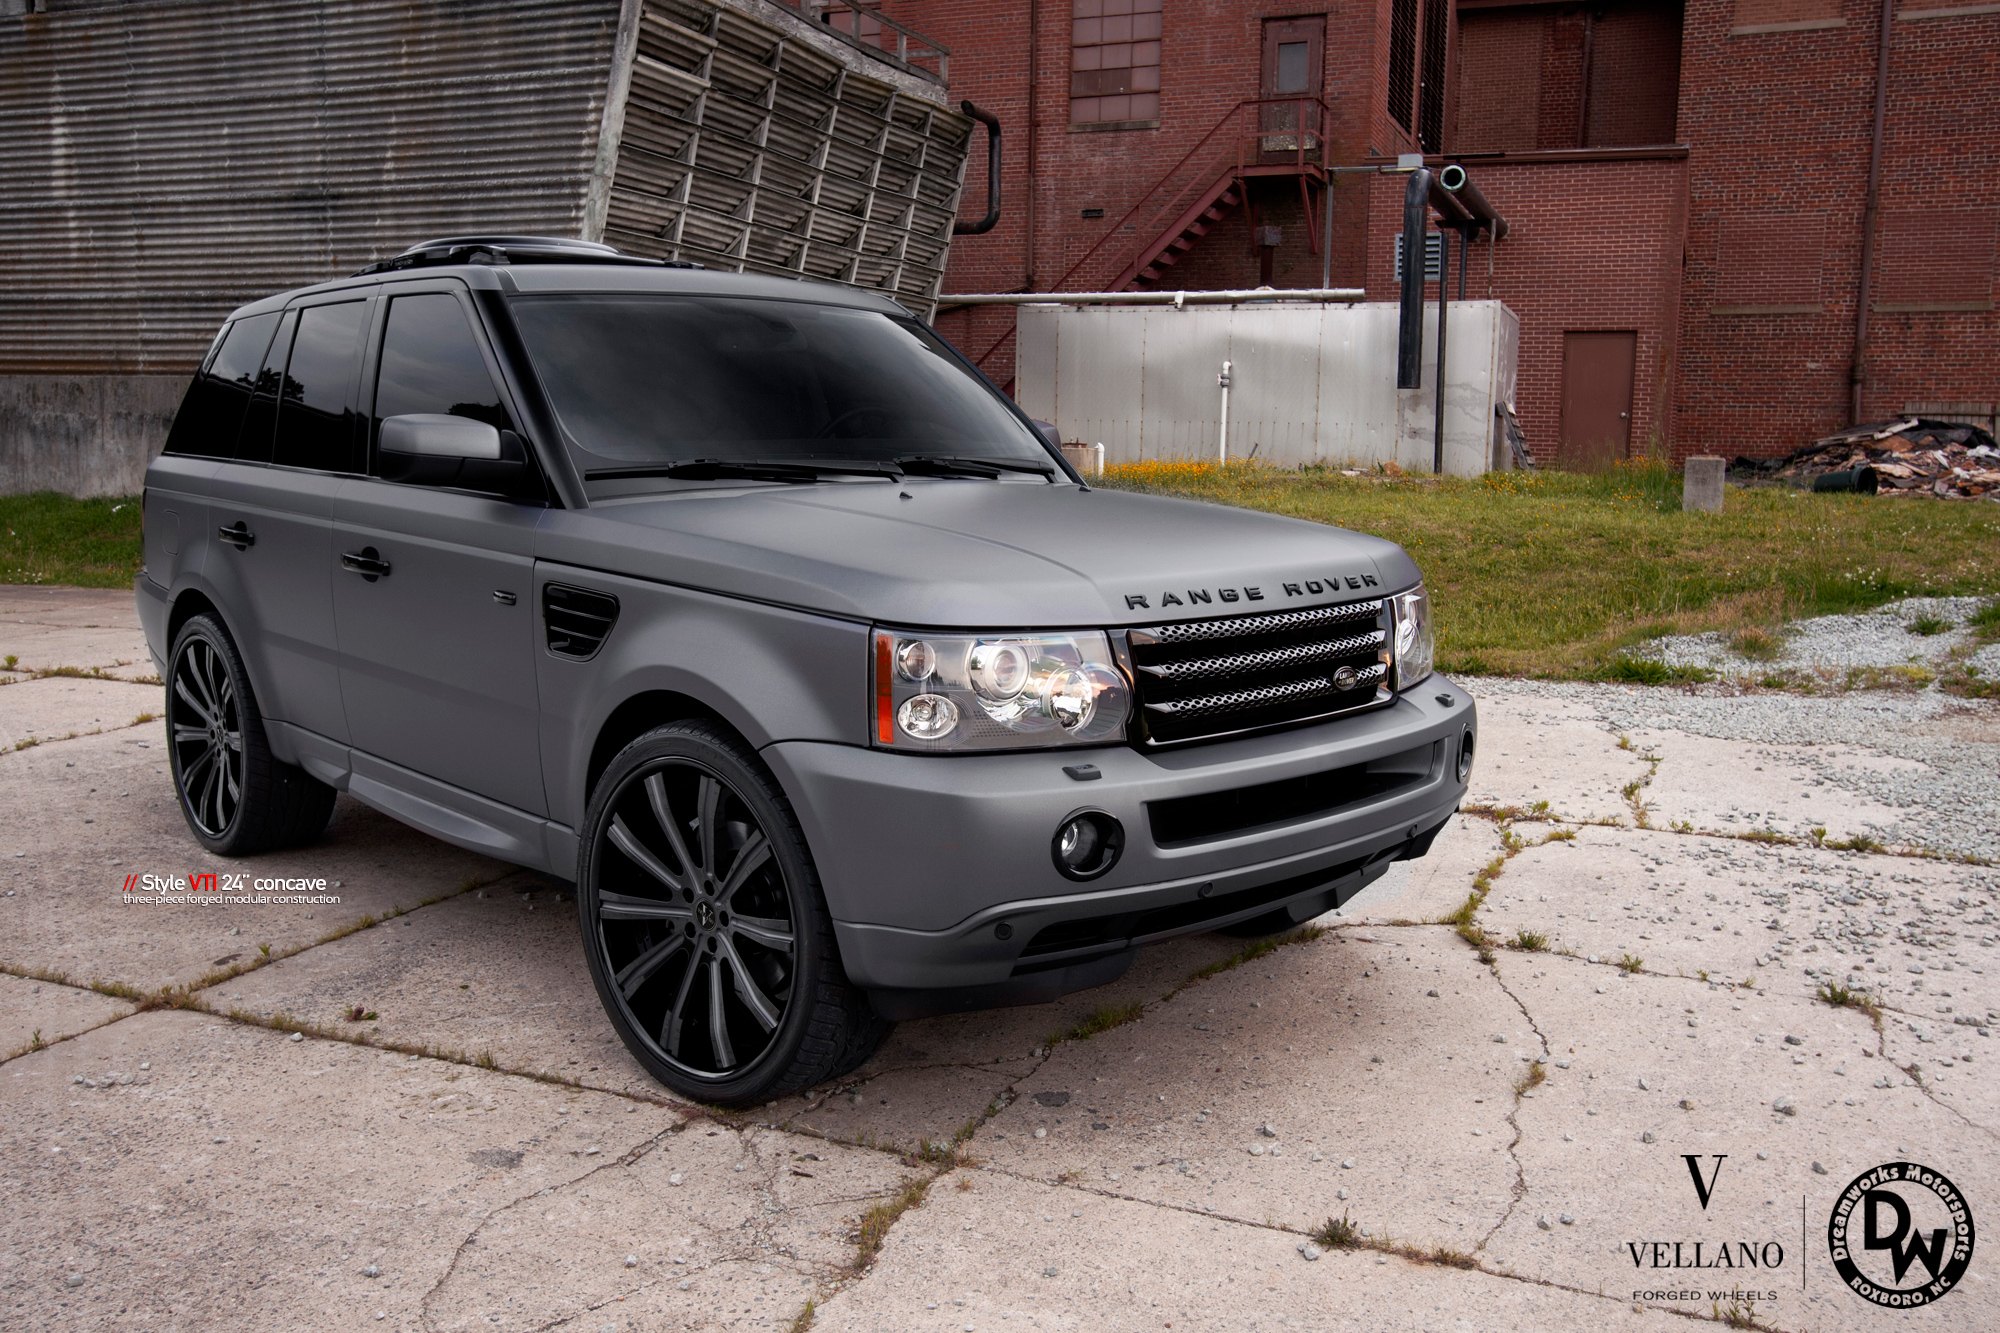 Gray Range Rover Sport with Aftermarket Headlights - Photo by Vellano